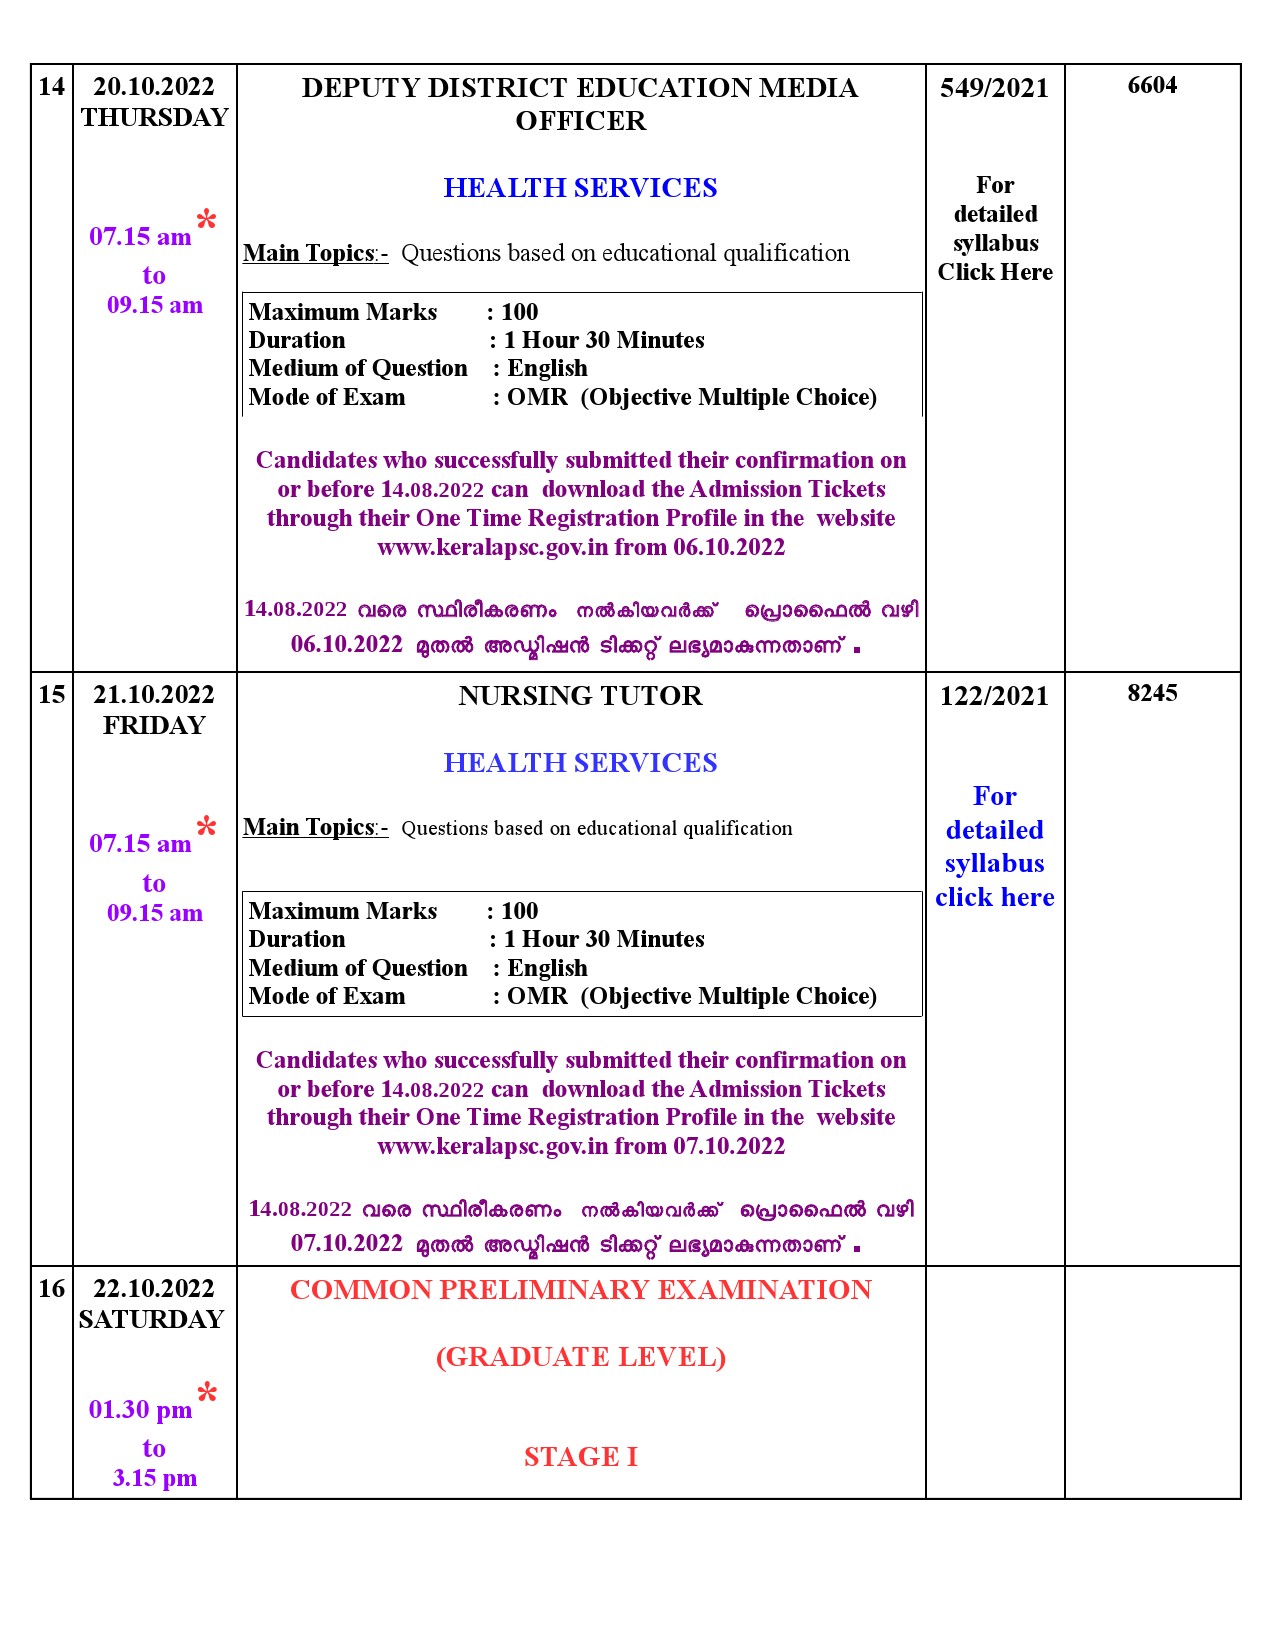 Examination Programme For The Month Of October 2022 - Notification Image 7